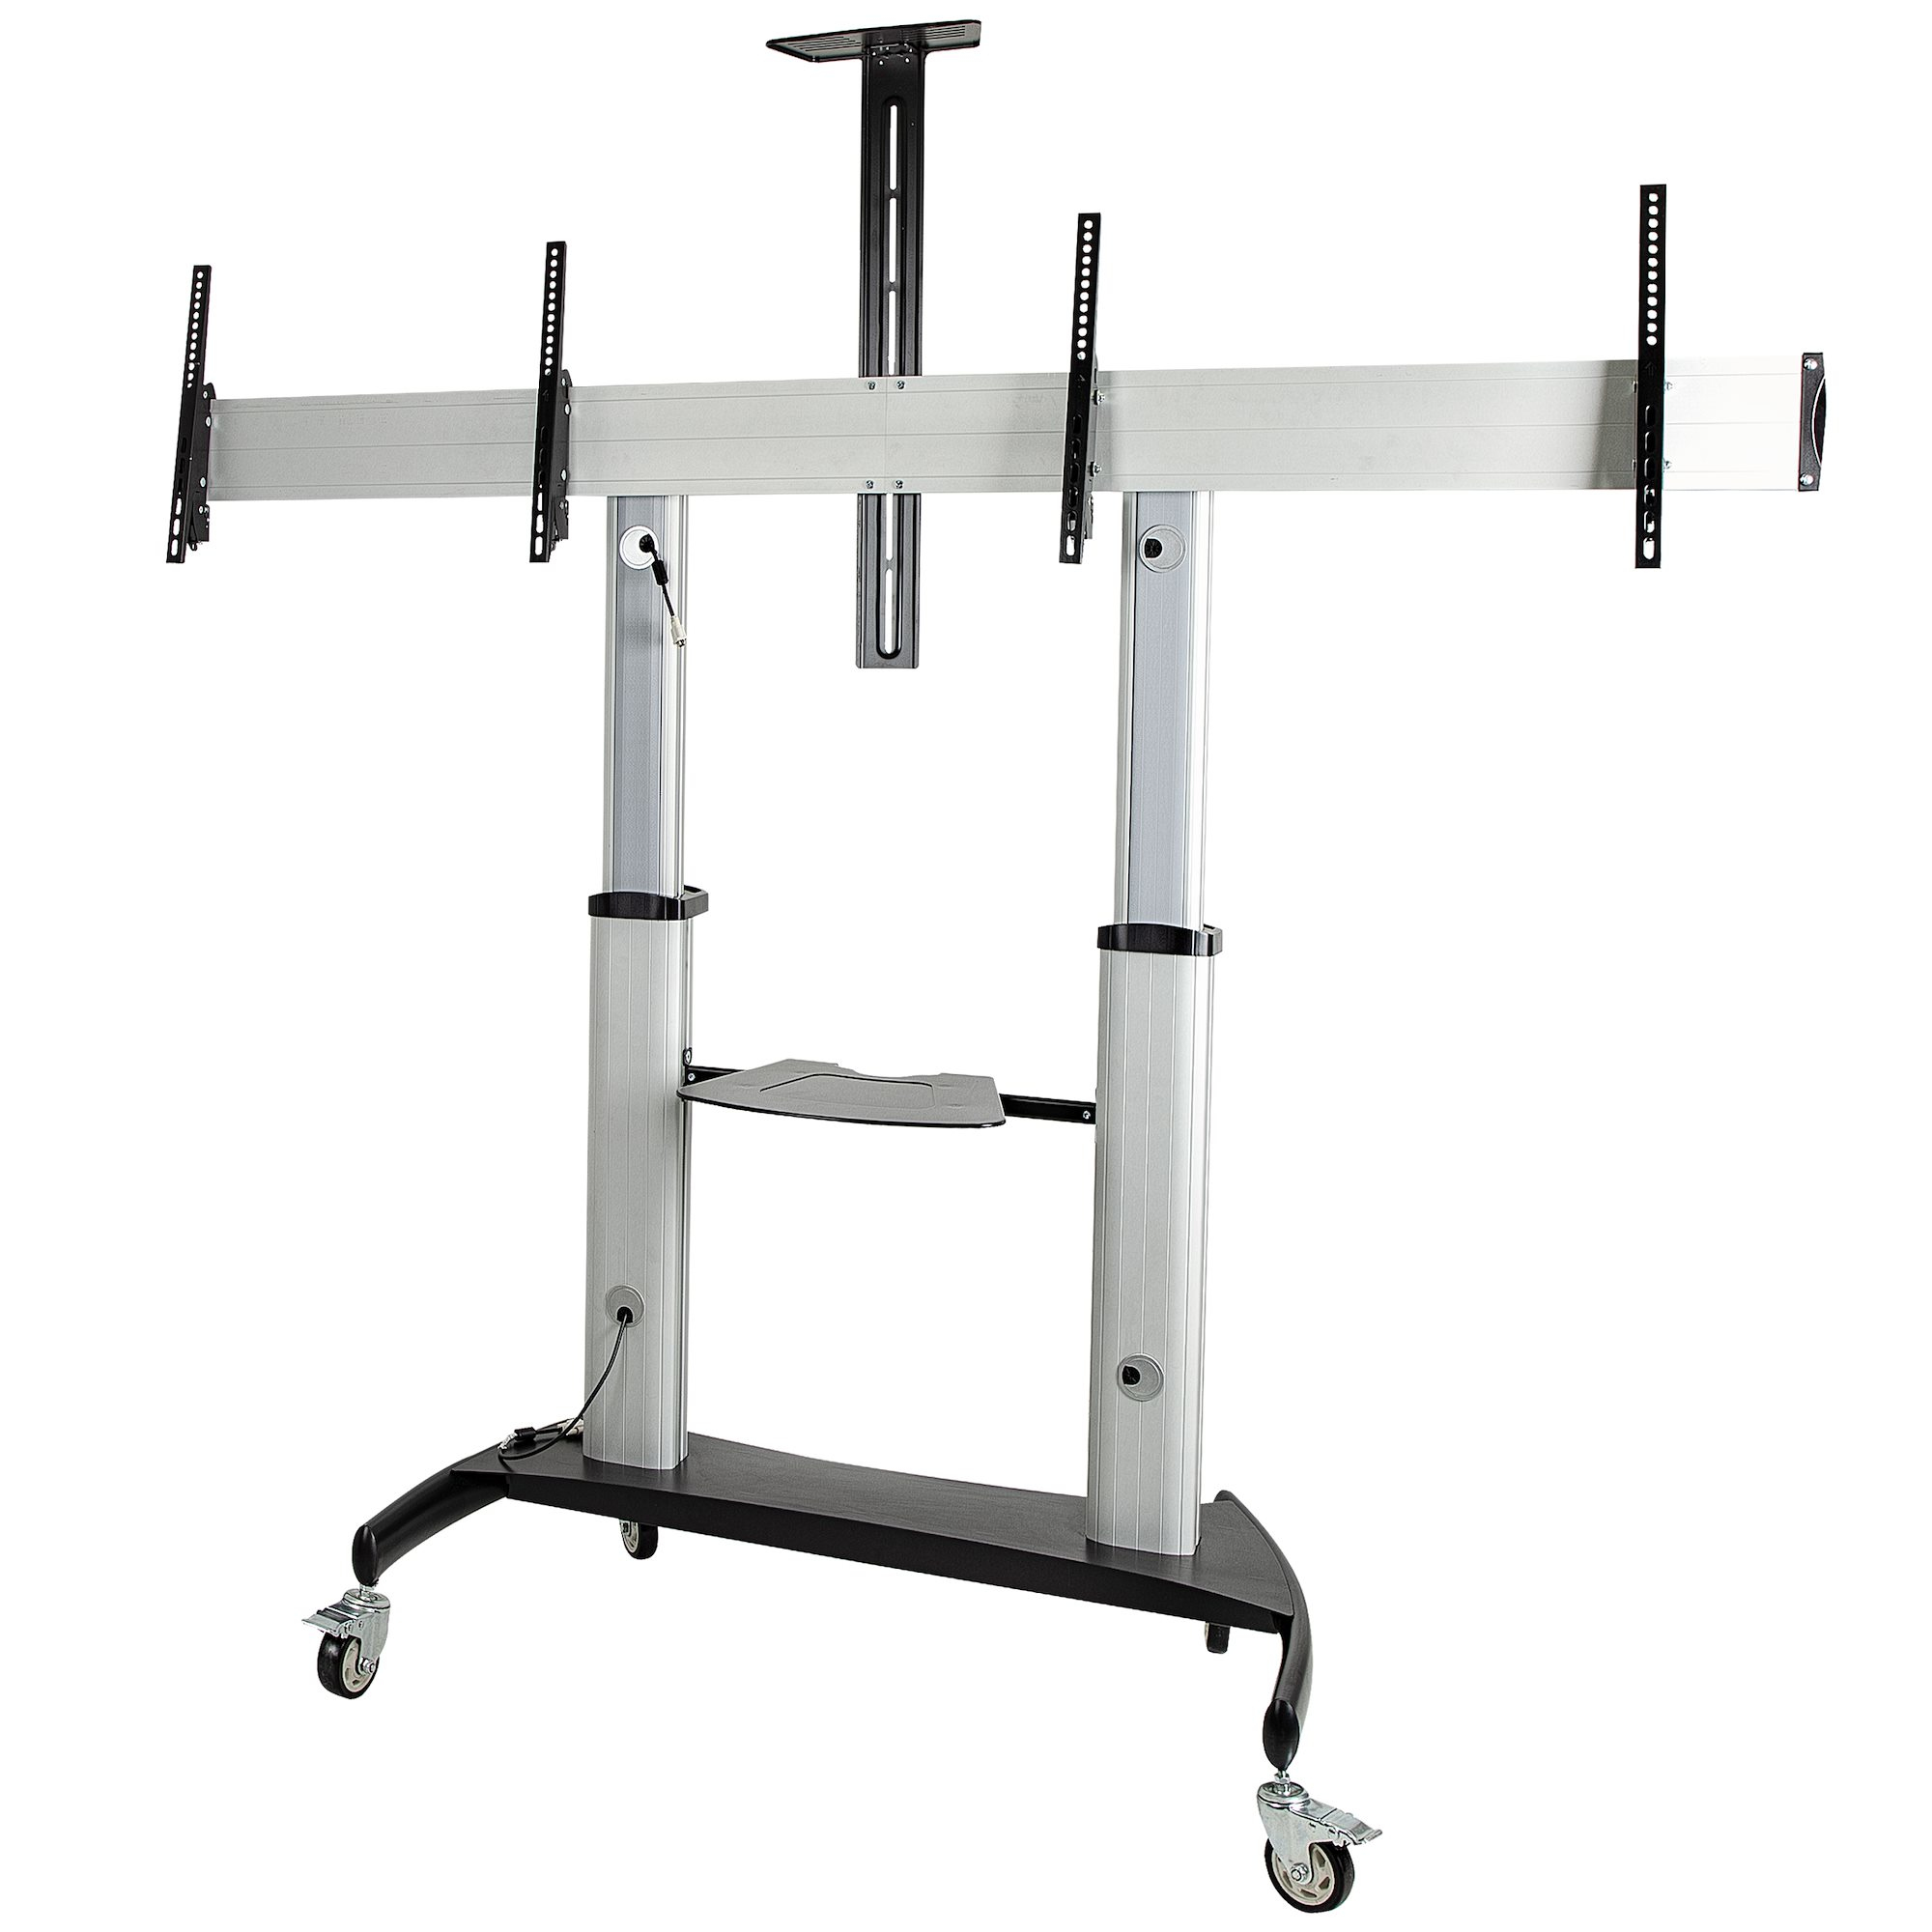 Photos - Mount/Stand Startech.com Dual TV Cart for 37-60in VESA TVs up to 110lb/50kg each - STN 